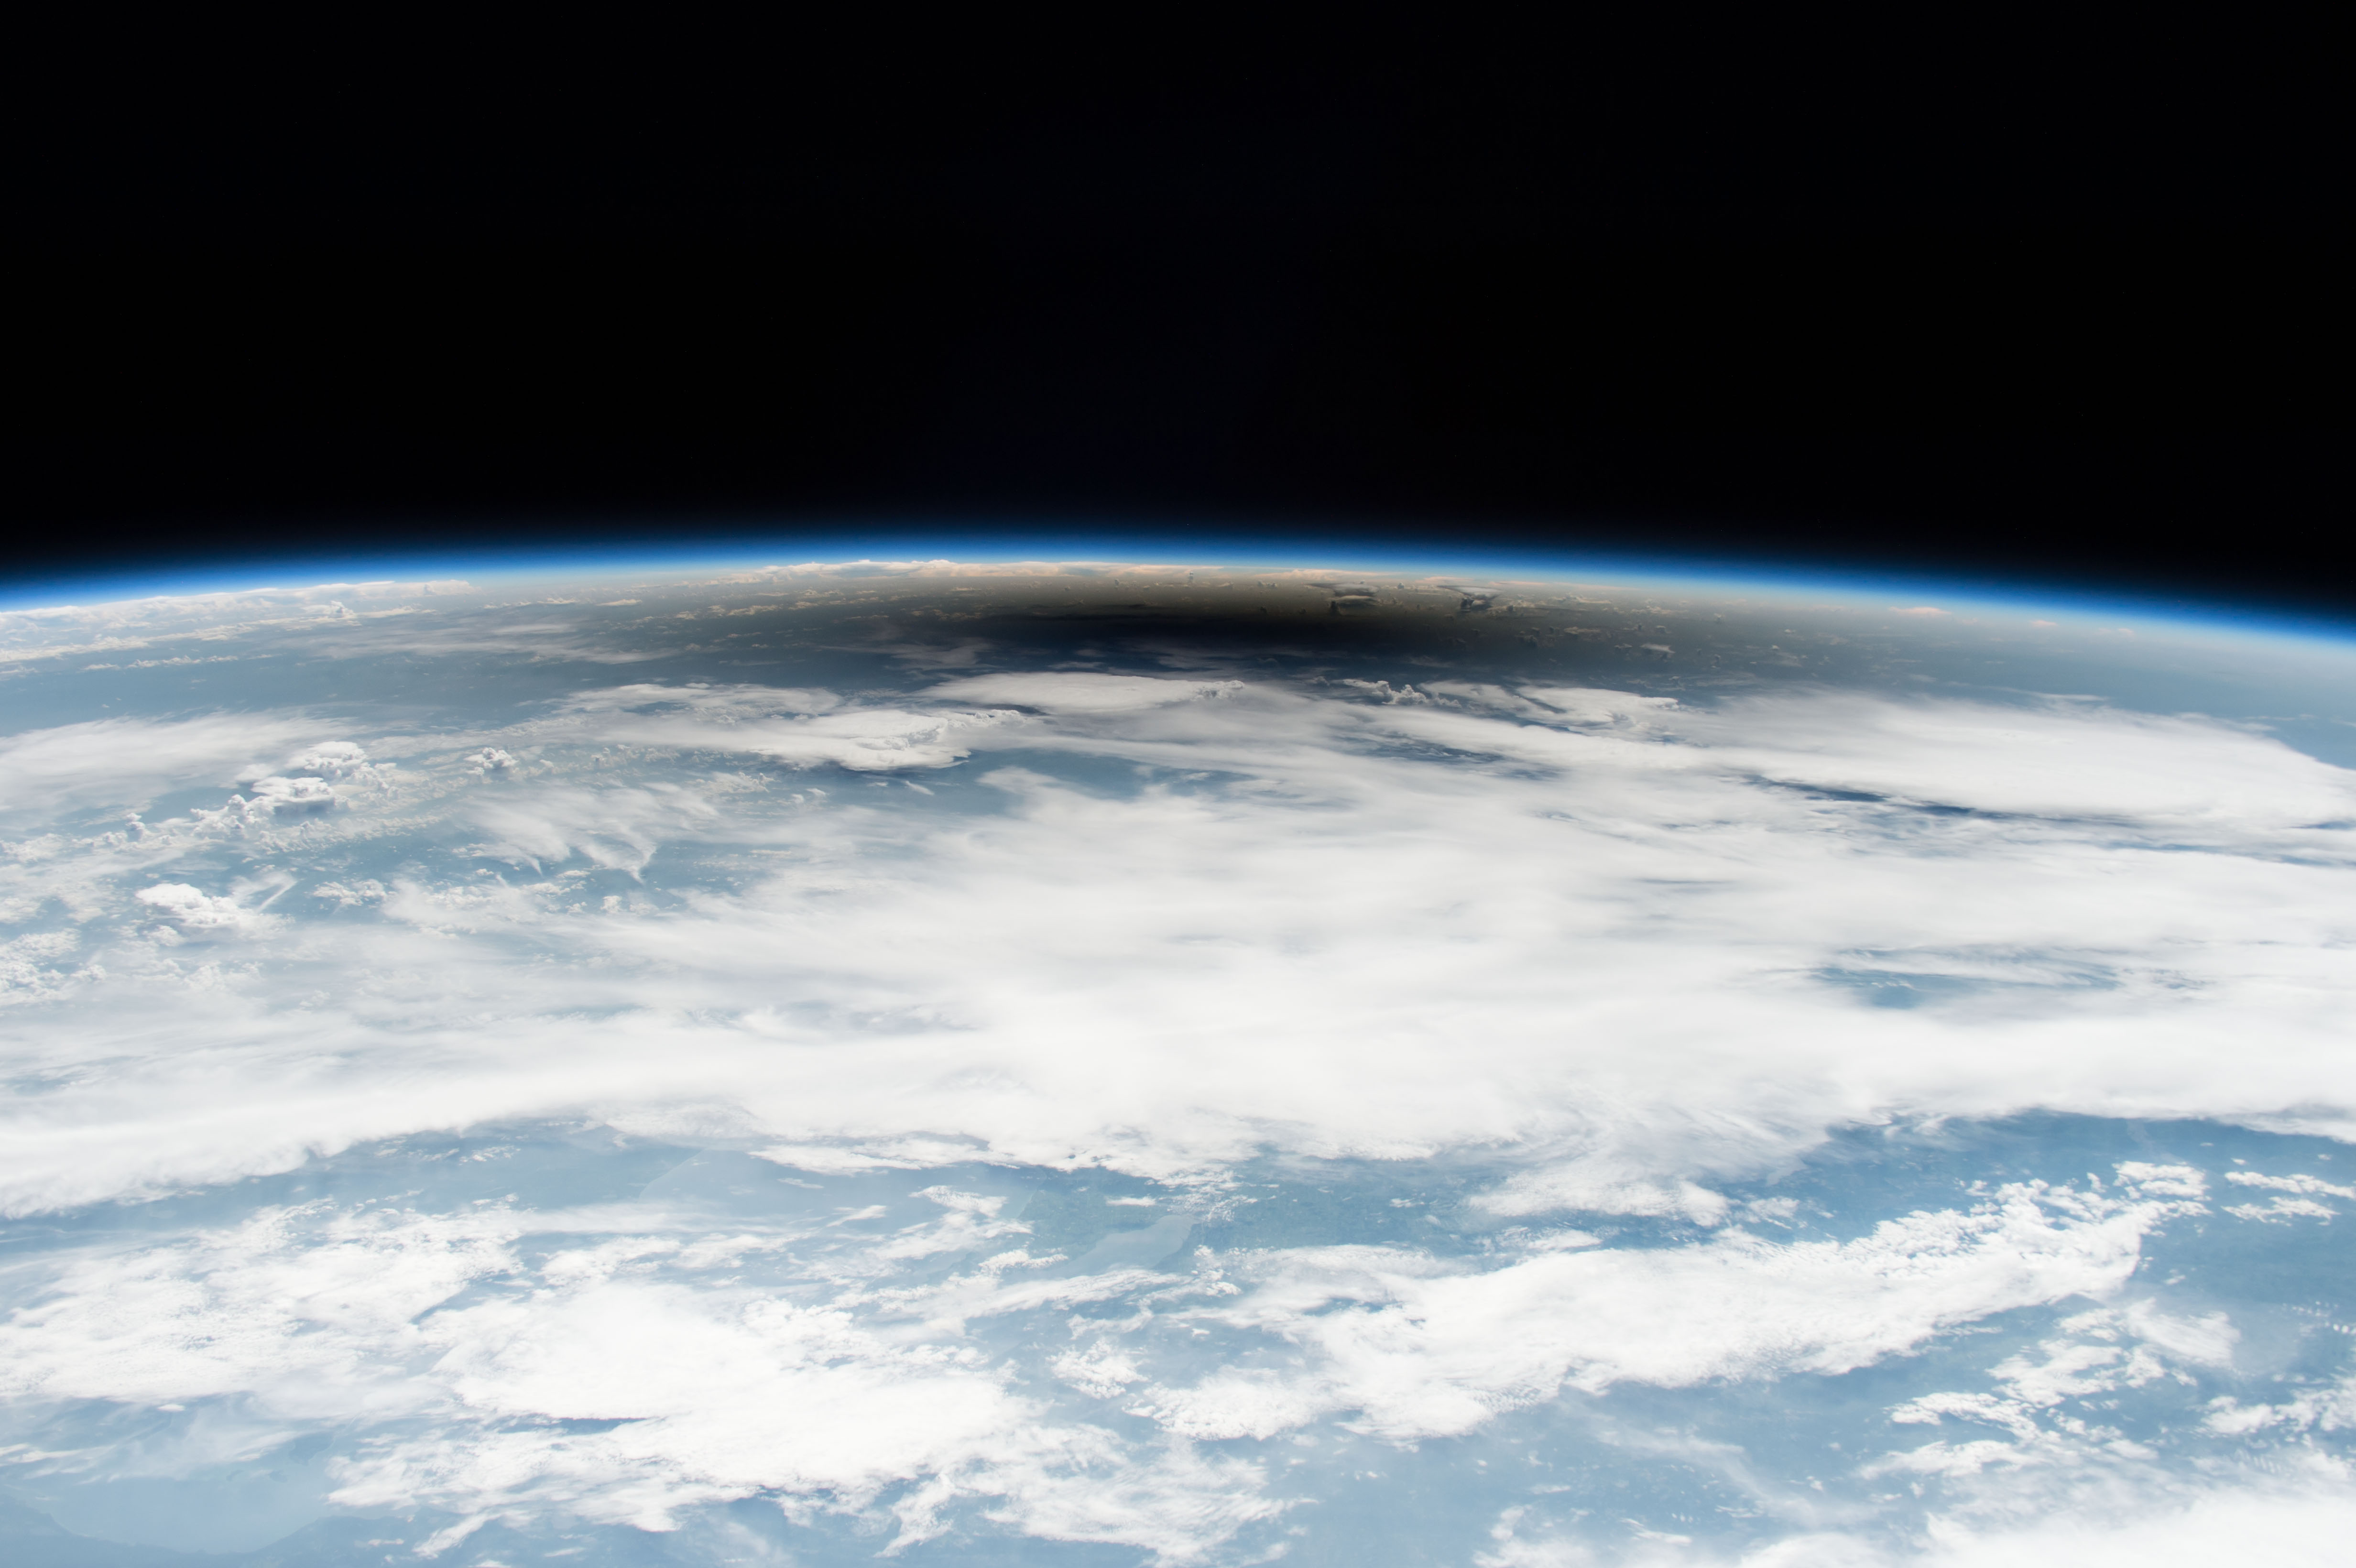 Expedition 52 image of the August 2017 total eclipse over North America